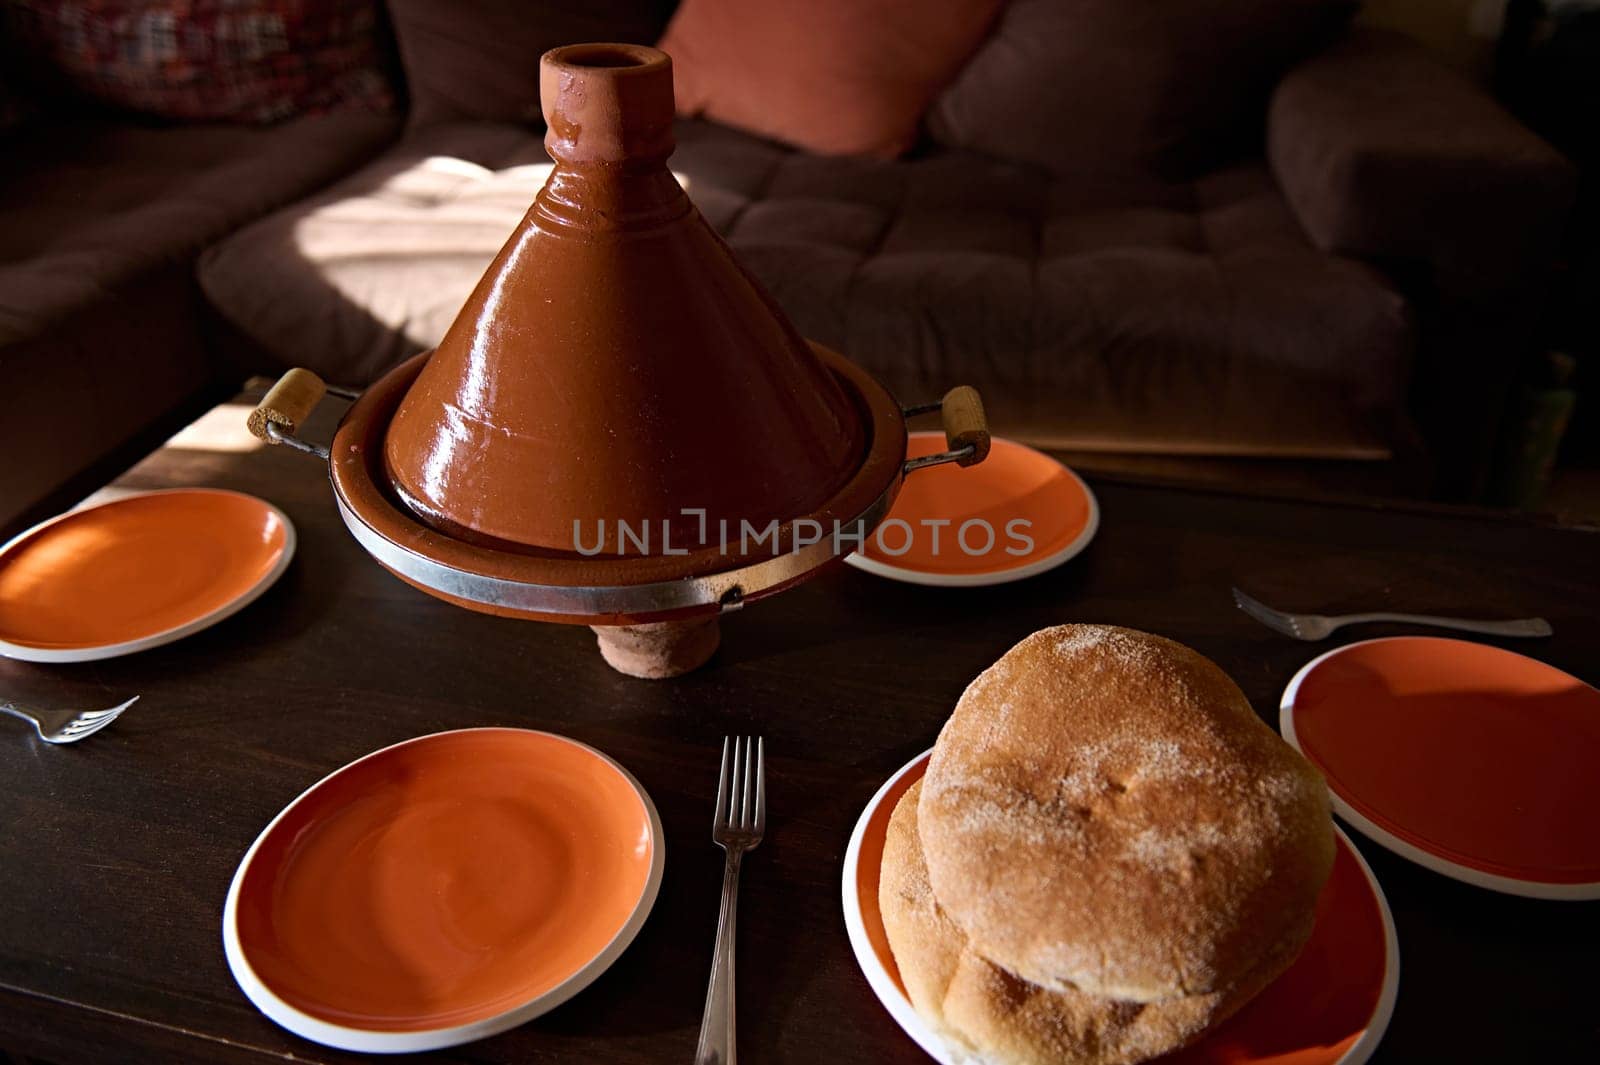 Traditional Moroccan tasty meal cooked in tagine clay pot with freshly baked bread on the table at home. Cultures, traditions and national cuisine of Morocco